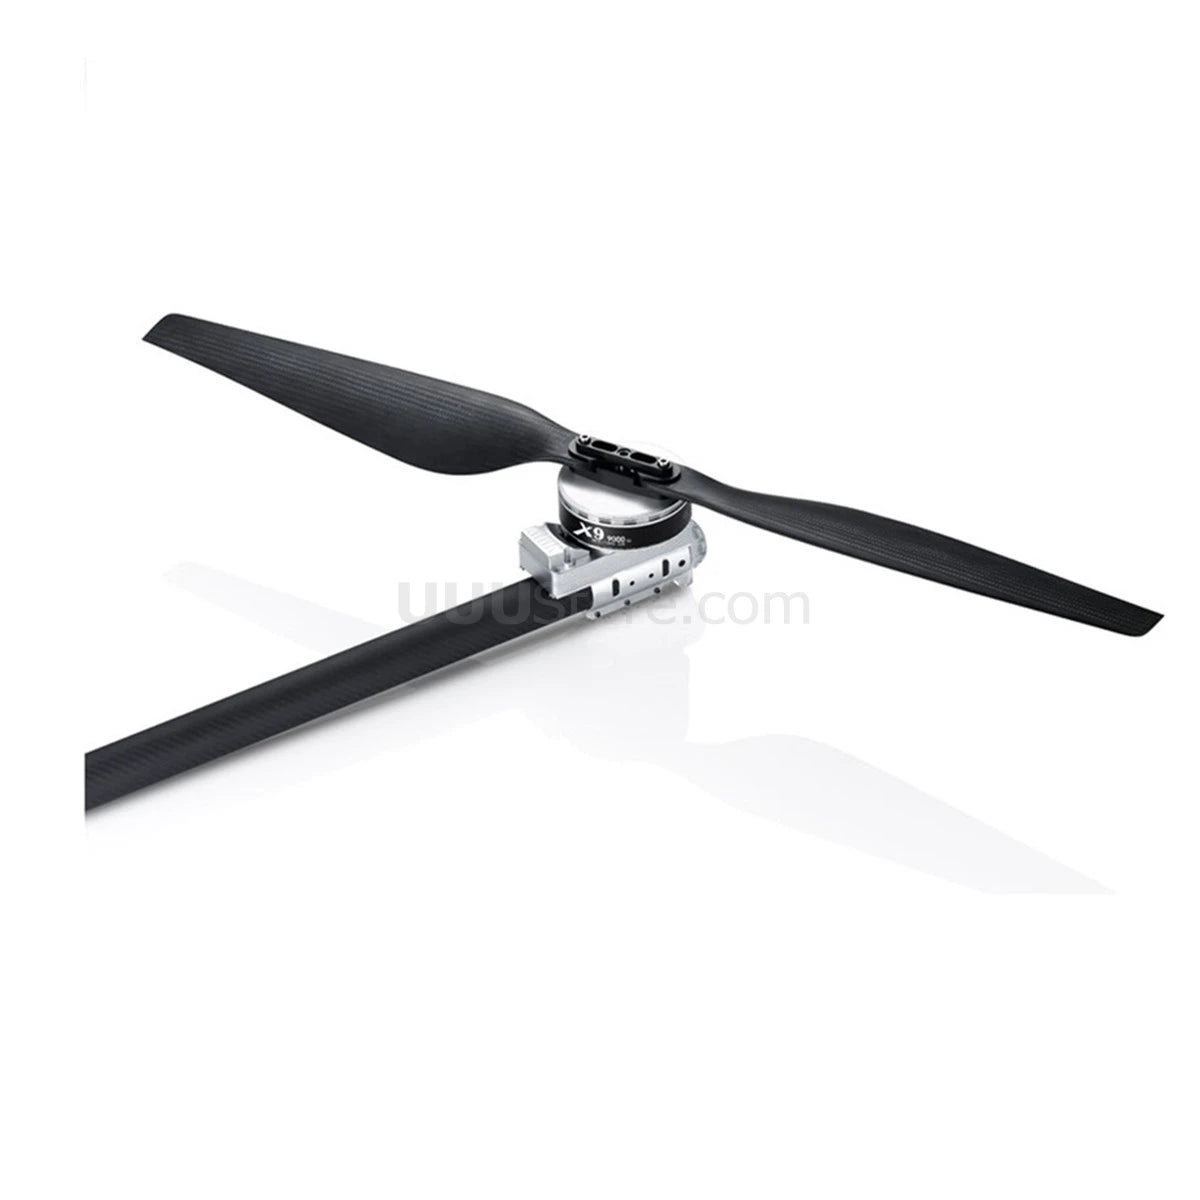 Hobbywing X9 Power System, waterproof feature ensures durability in various conditions